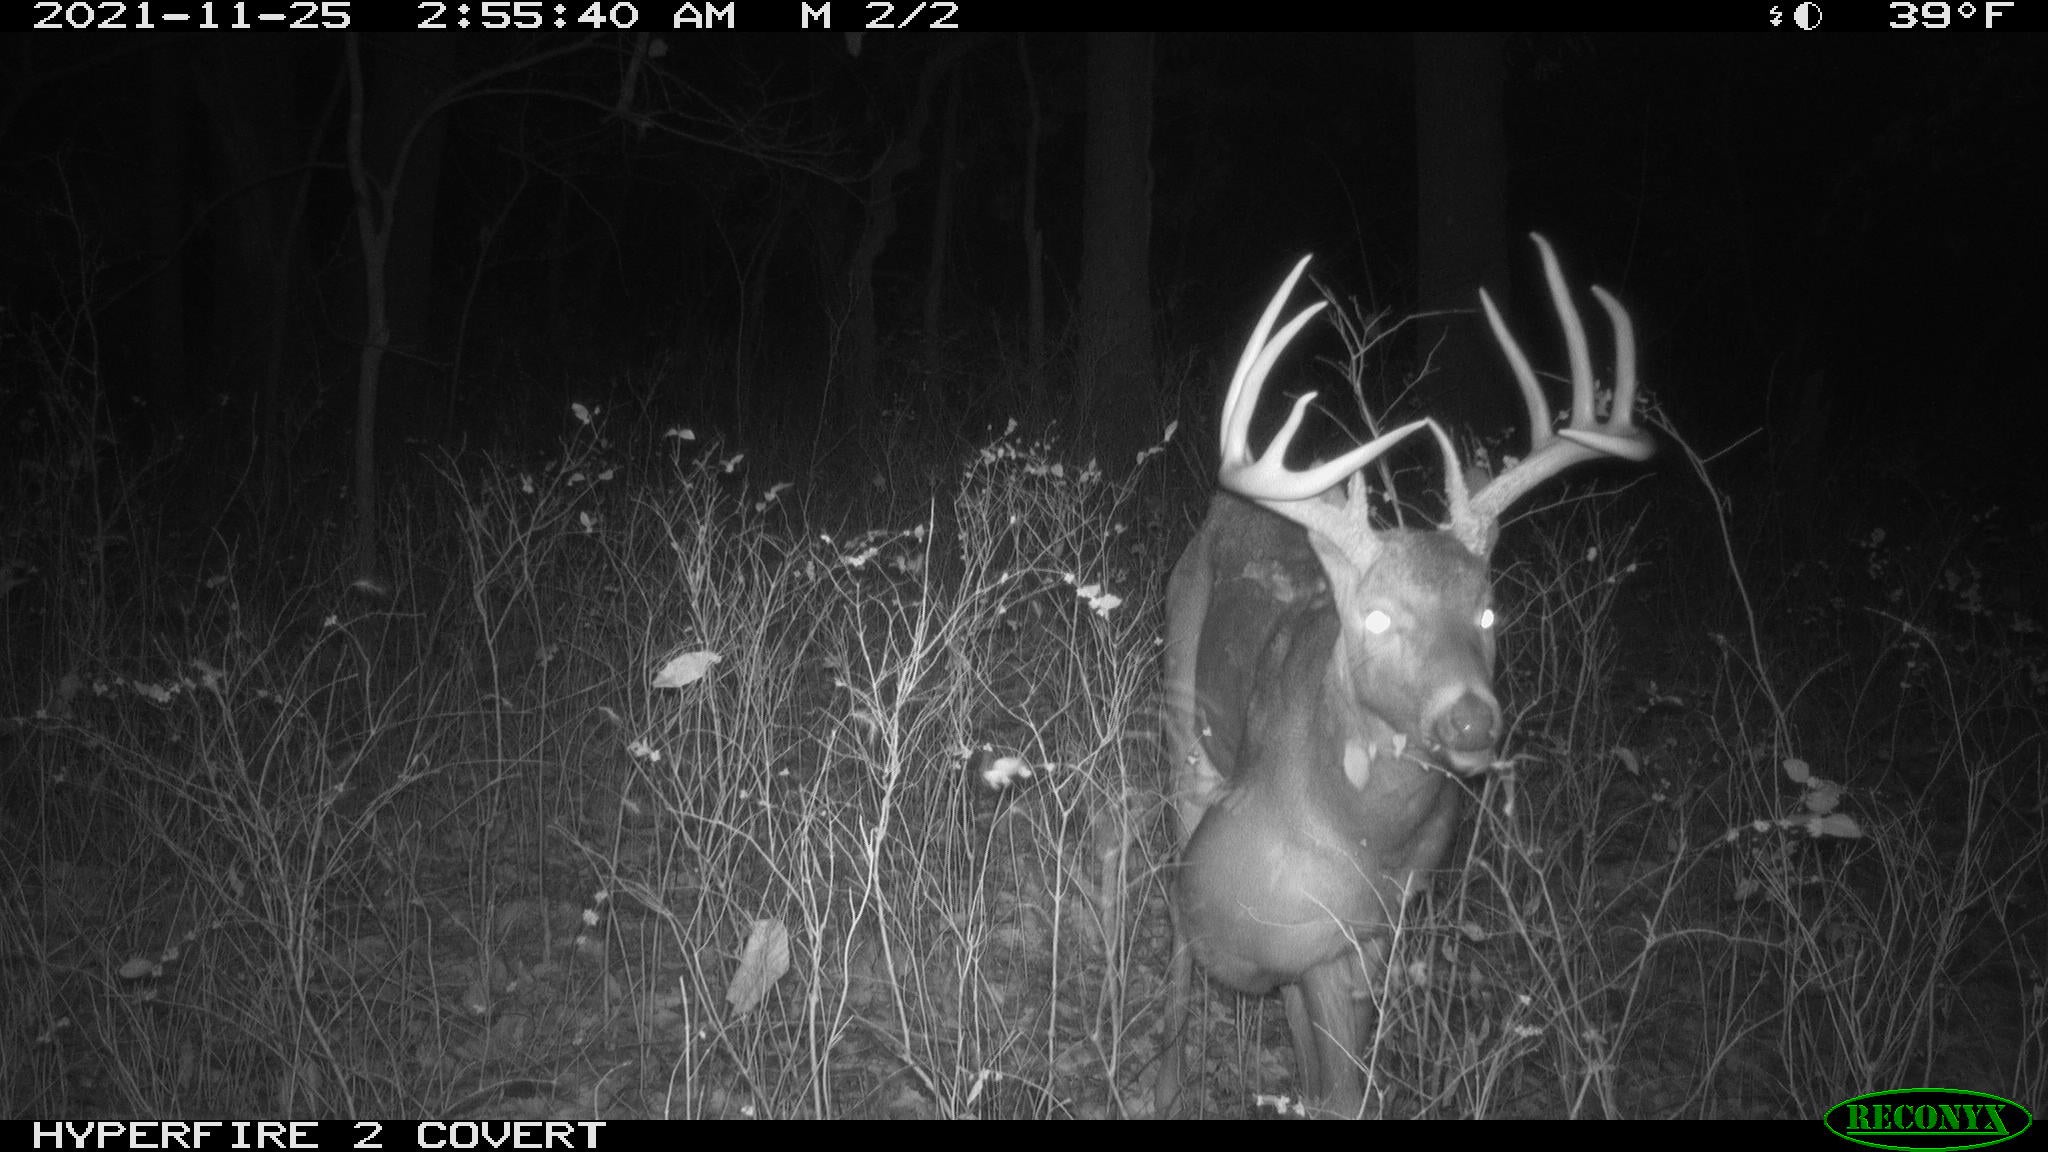 Bowhunter Kills 160-Class Buck with Basketball-Sized Growth